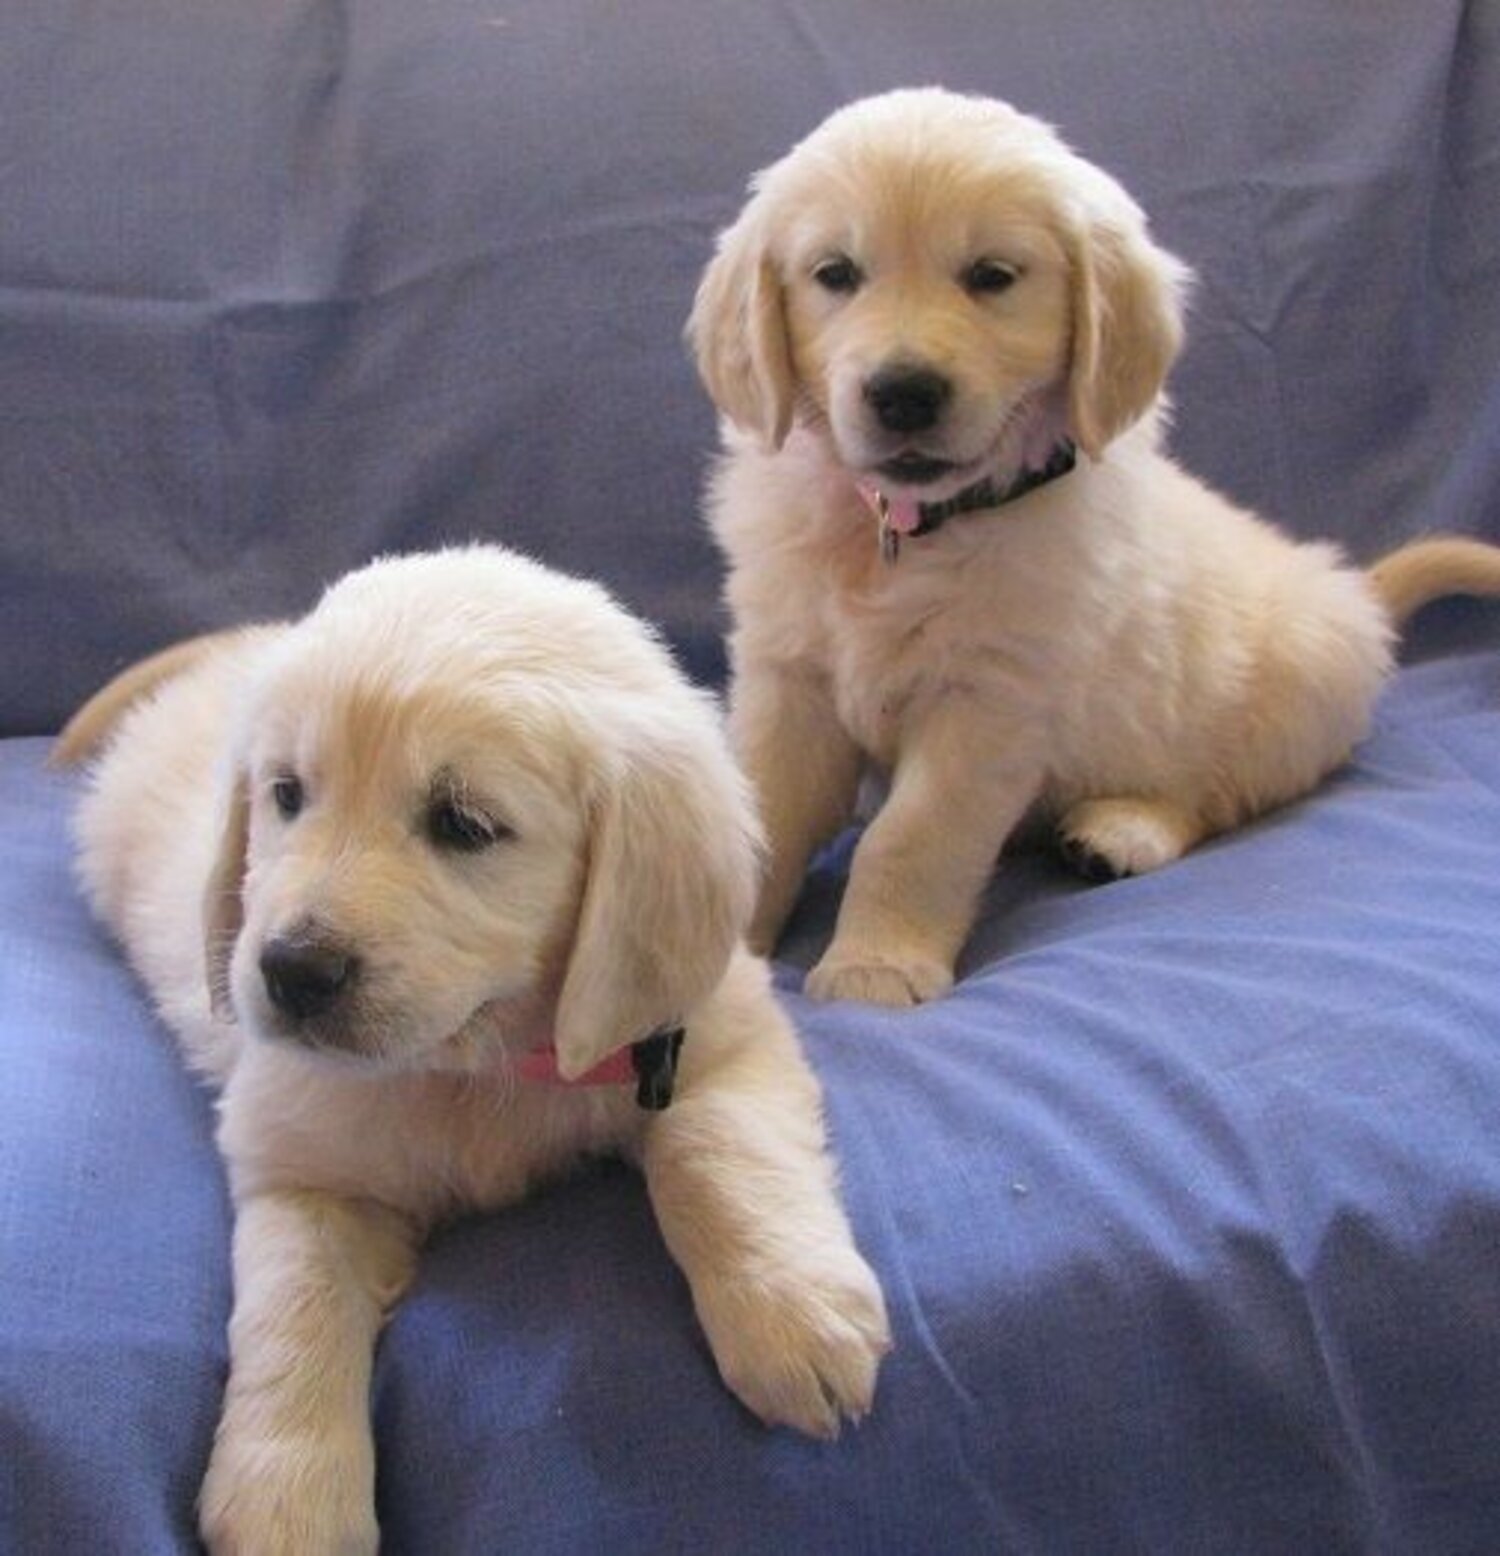 Golden retriver puppies from Bangalore. Breeder: Shruthi